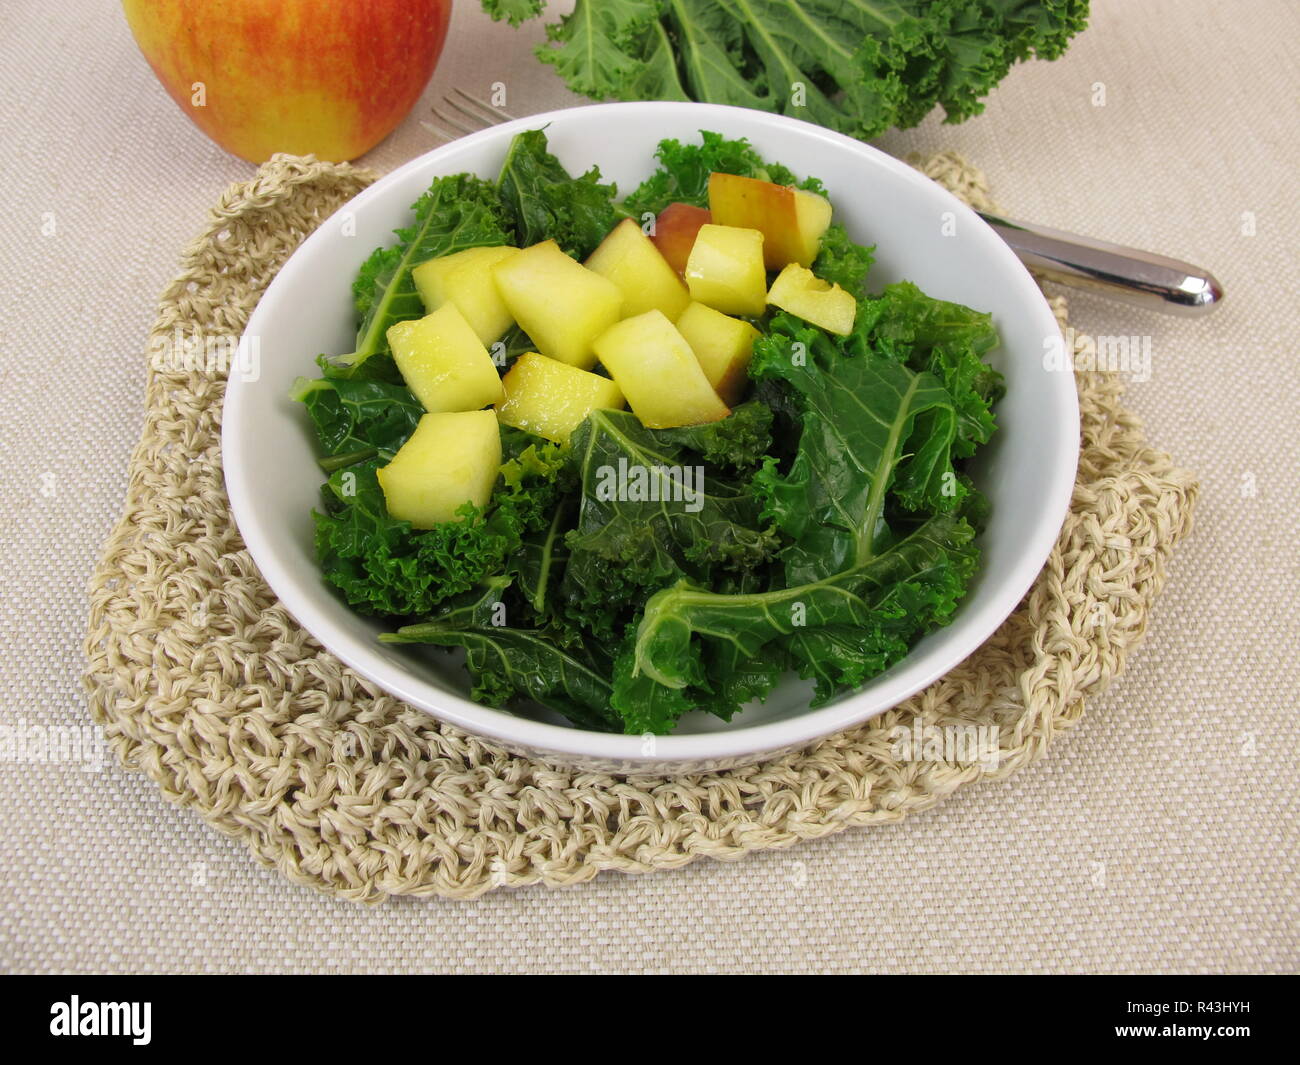 kale salad with baked apple Stock Photo